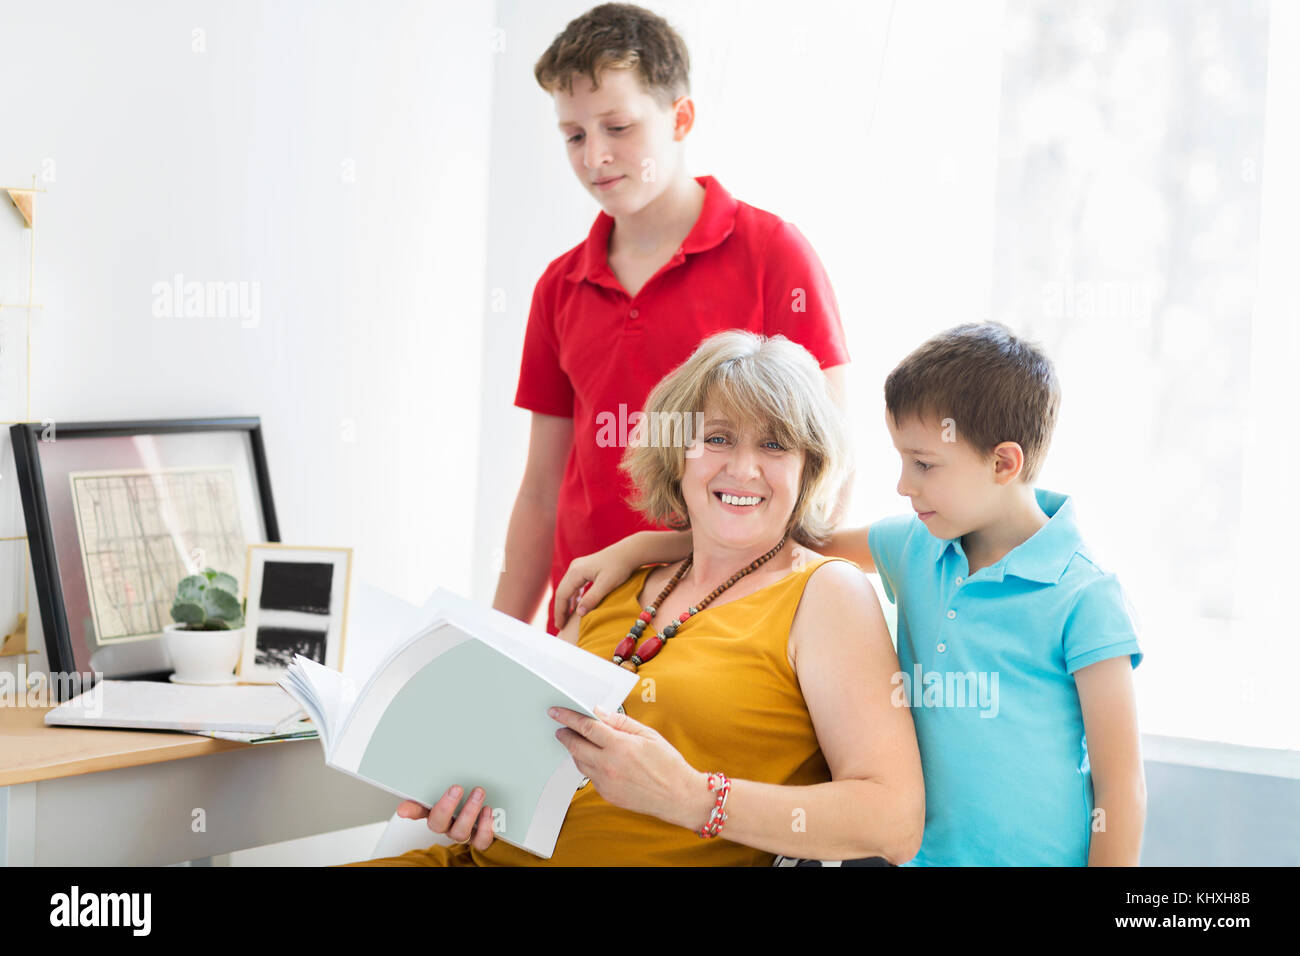 Mid-age woman with two young boys indoors. Family concept Stock Photo